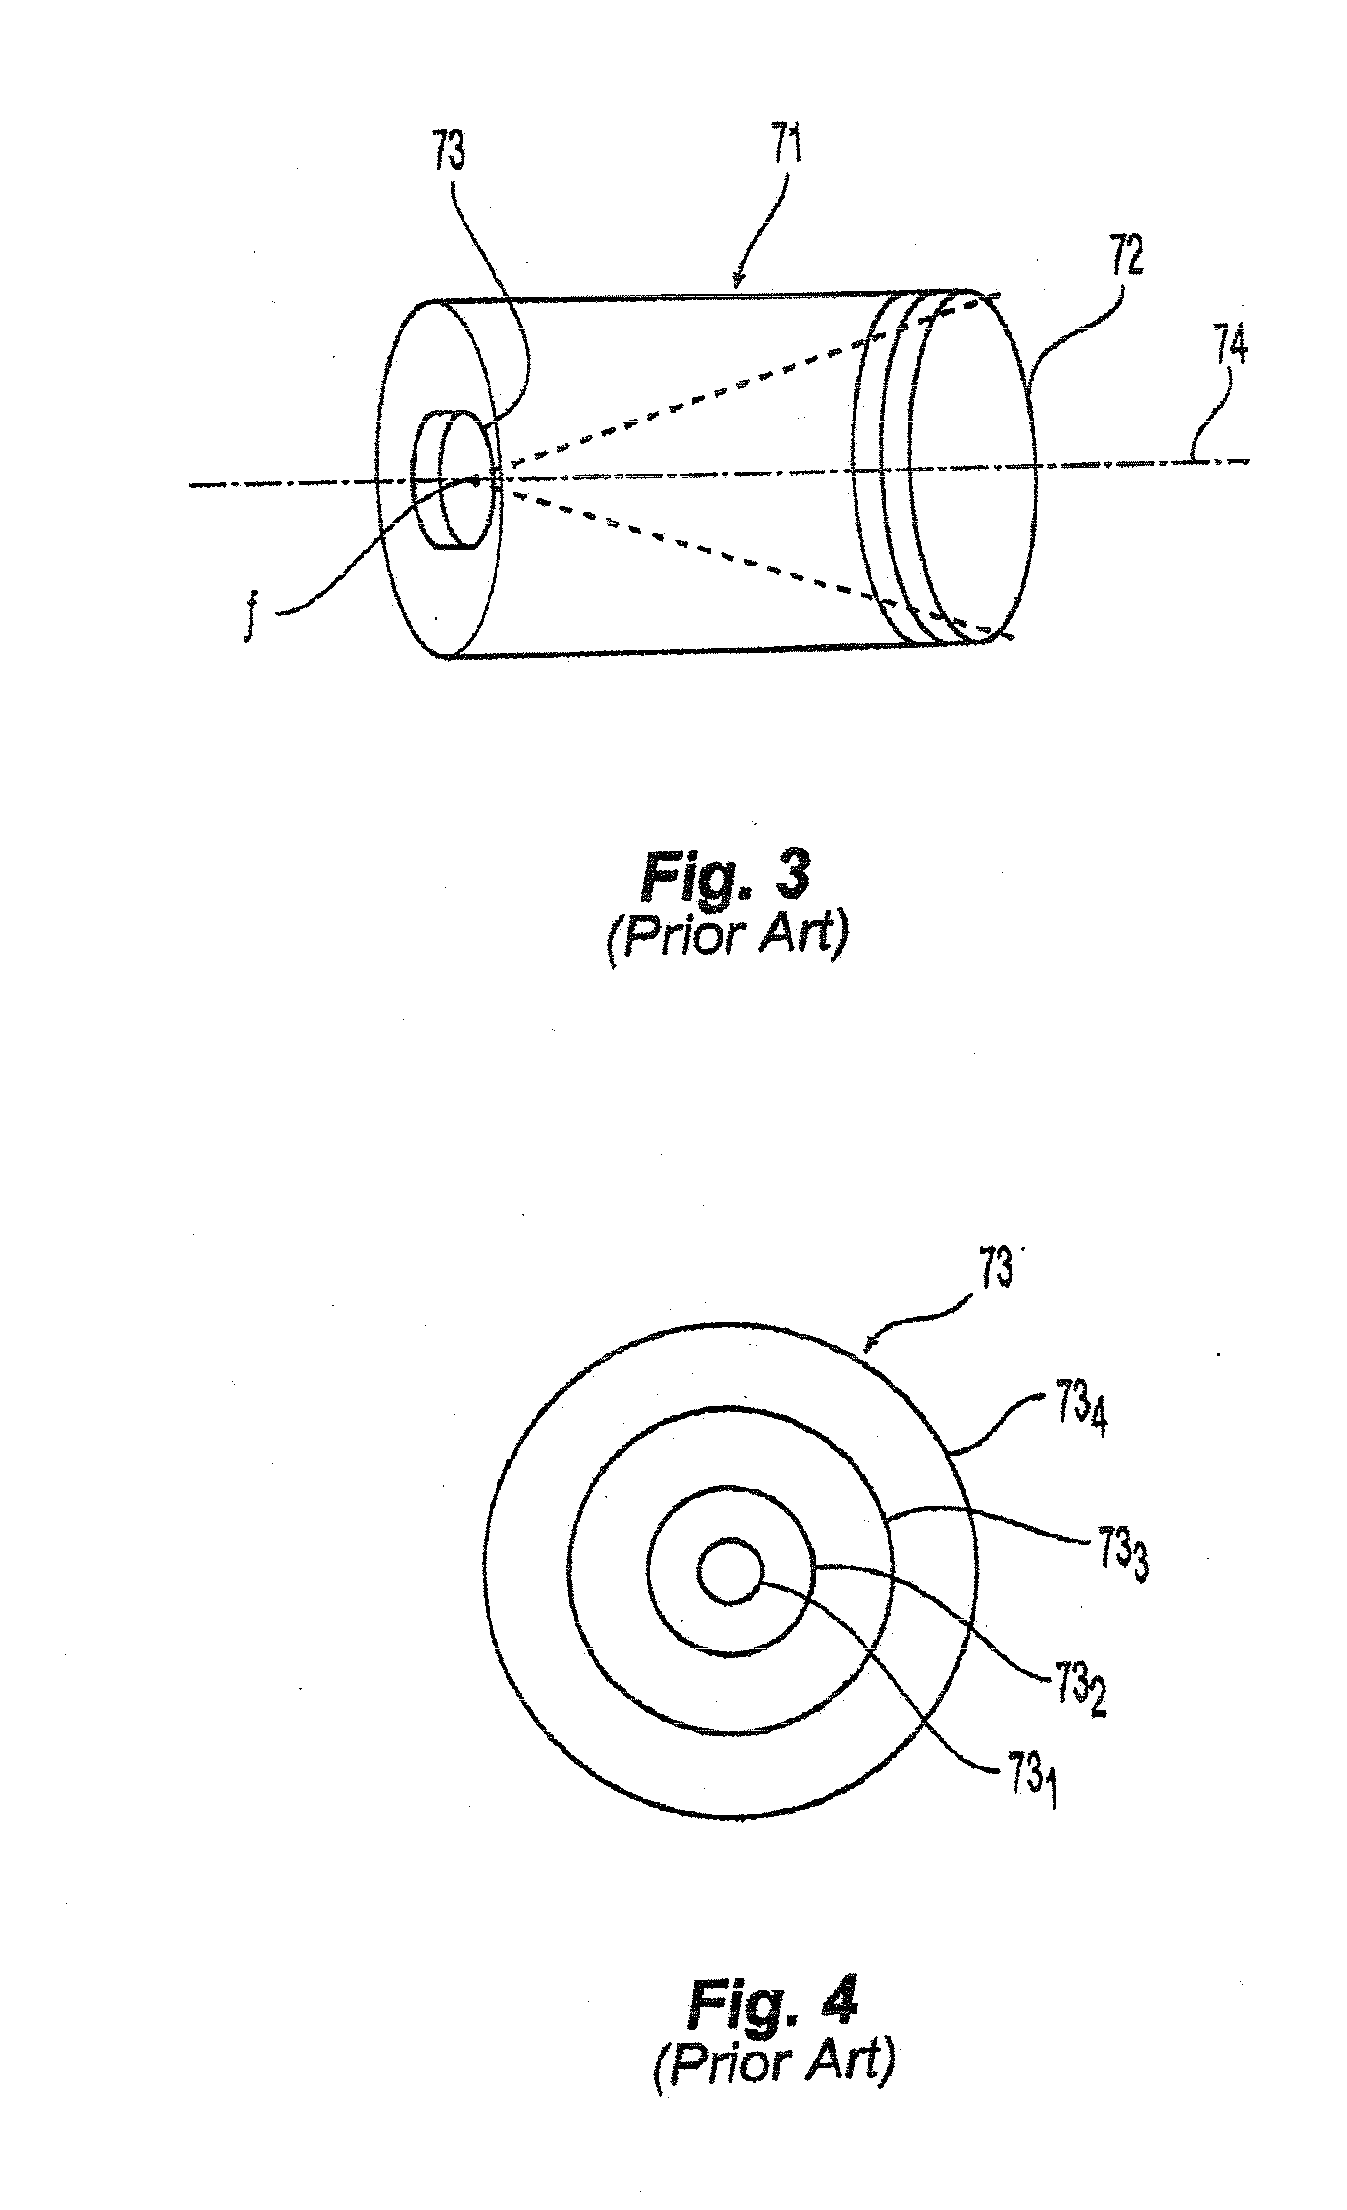 Apparatus and method for detecting aircraft icing conditions